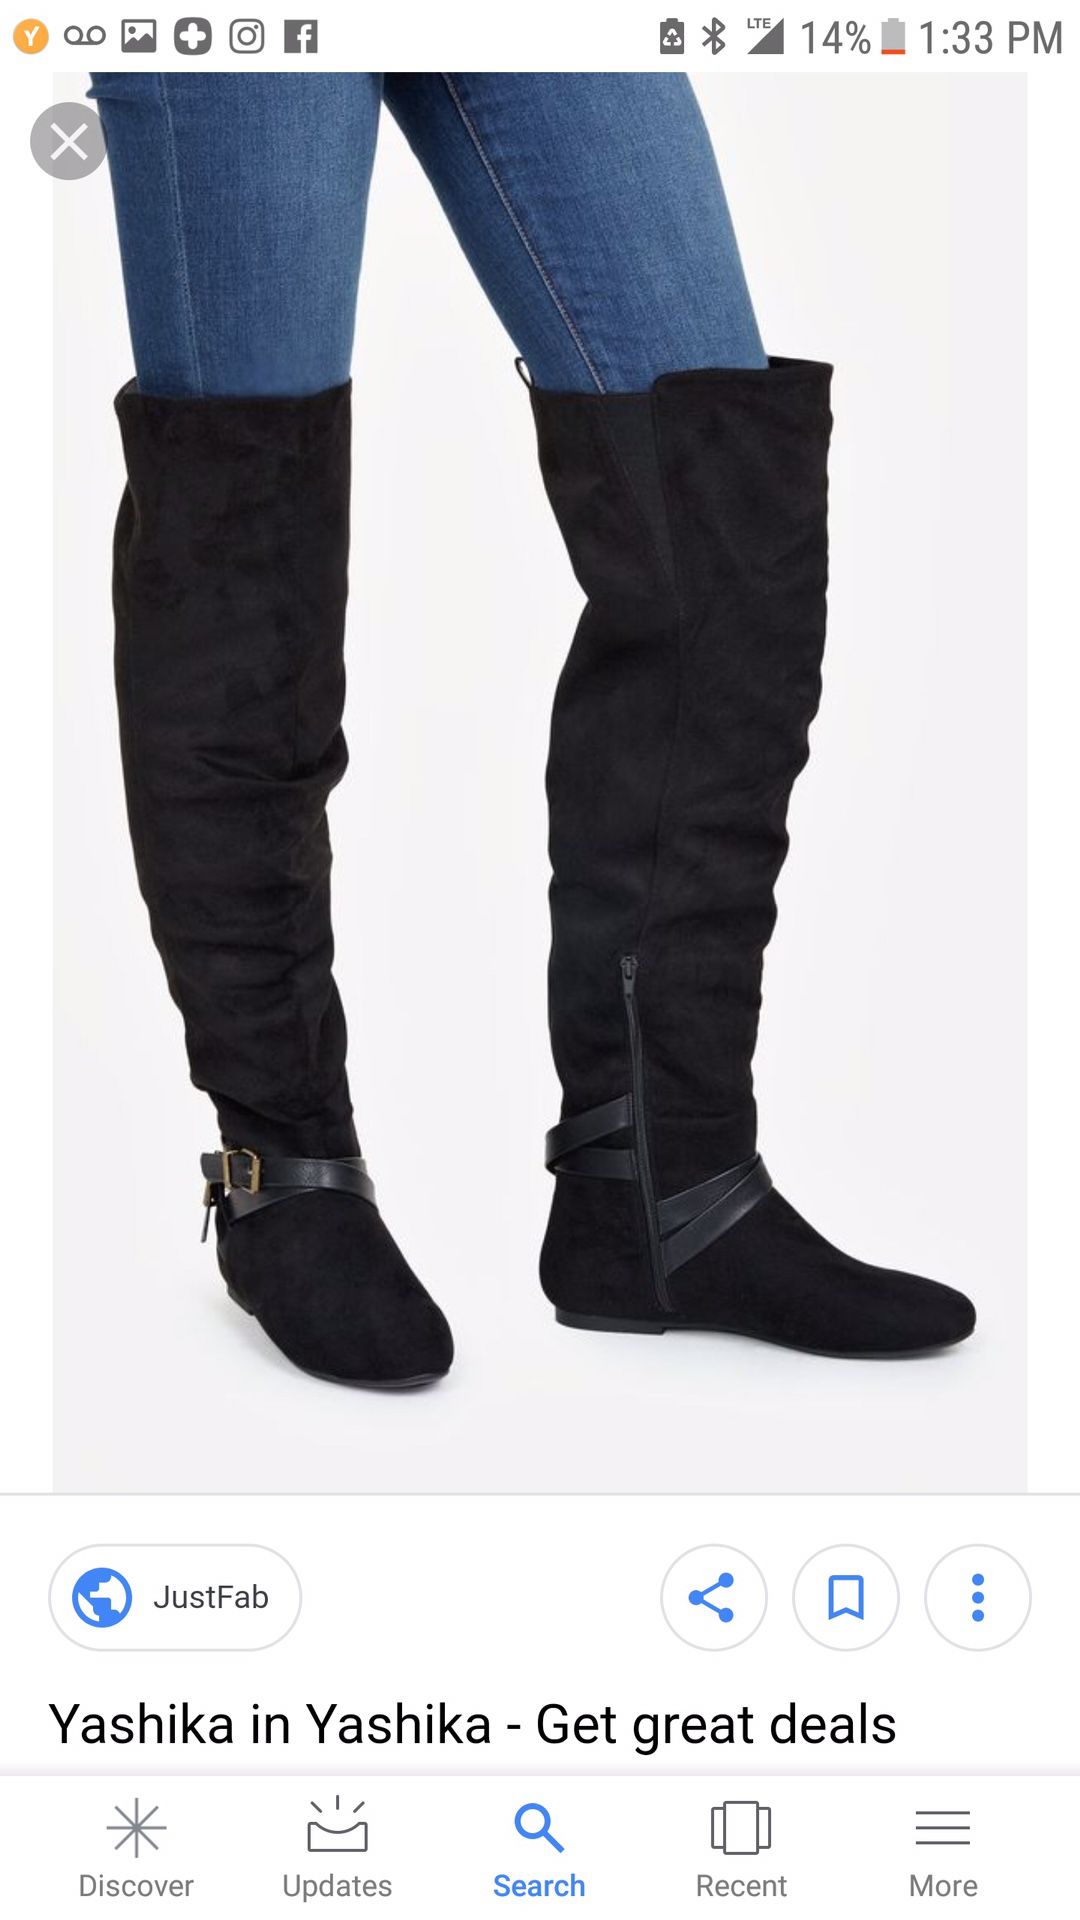 Black suede knee high boots